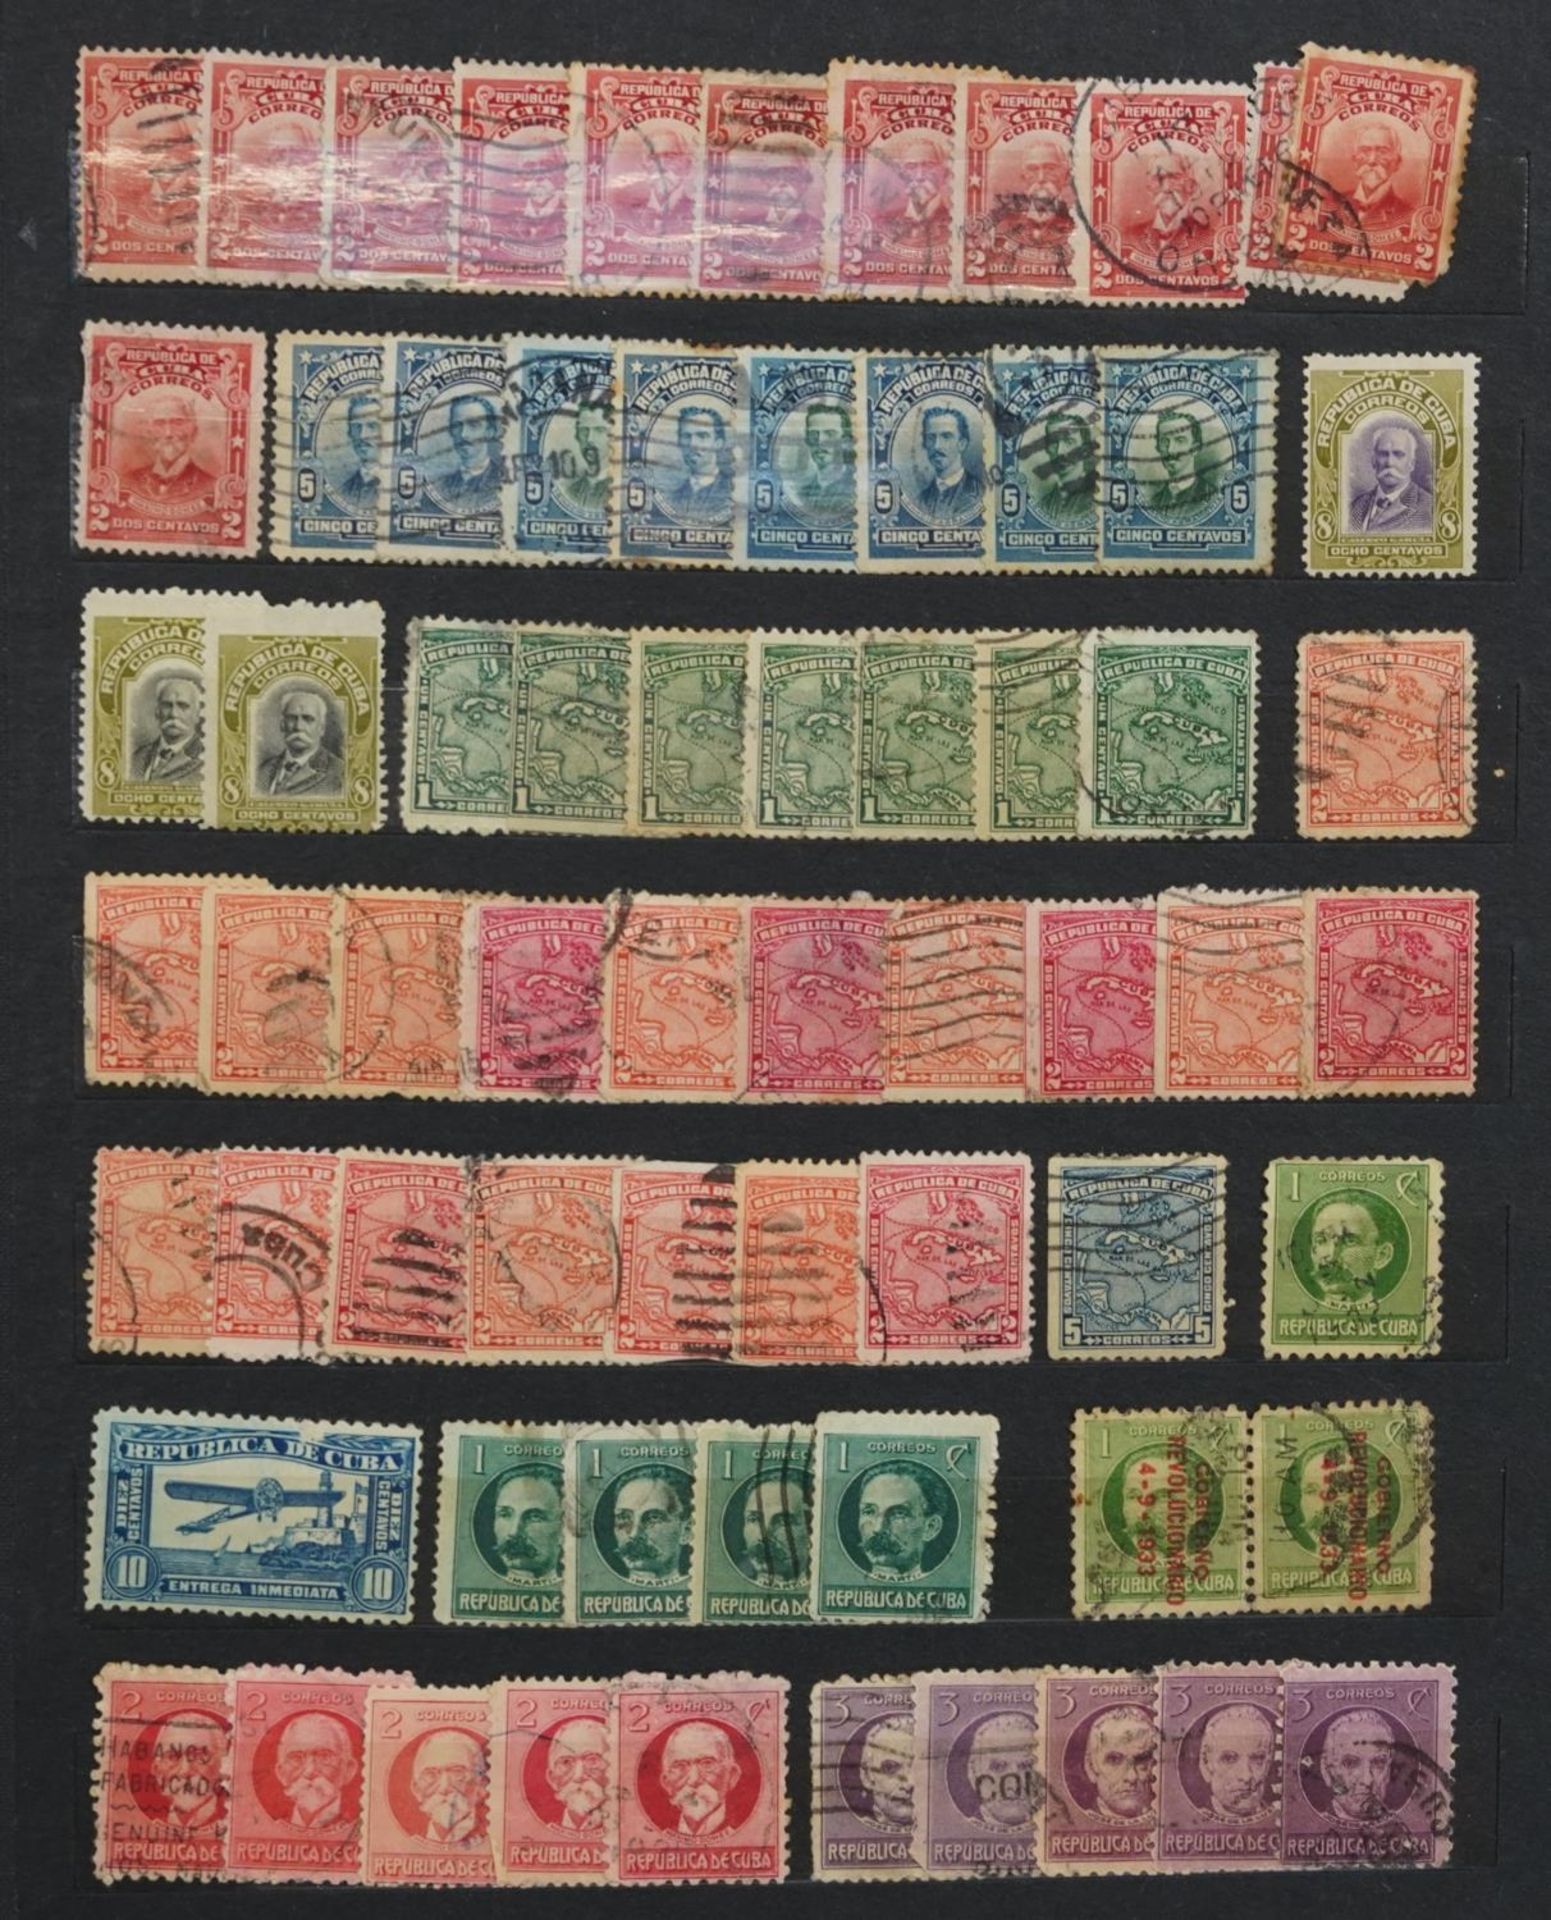 Collection of 19th century world stamps arranged on covers and in three albums including Cuba and